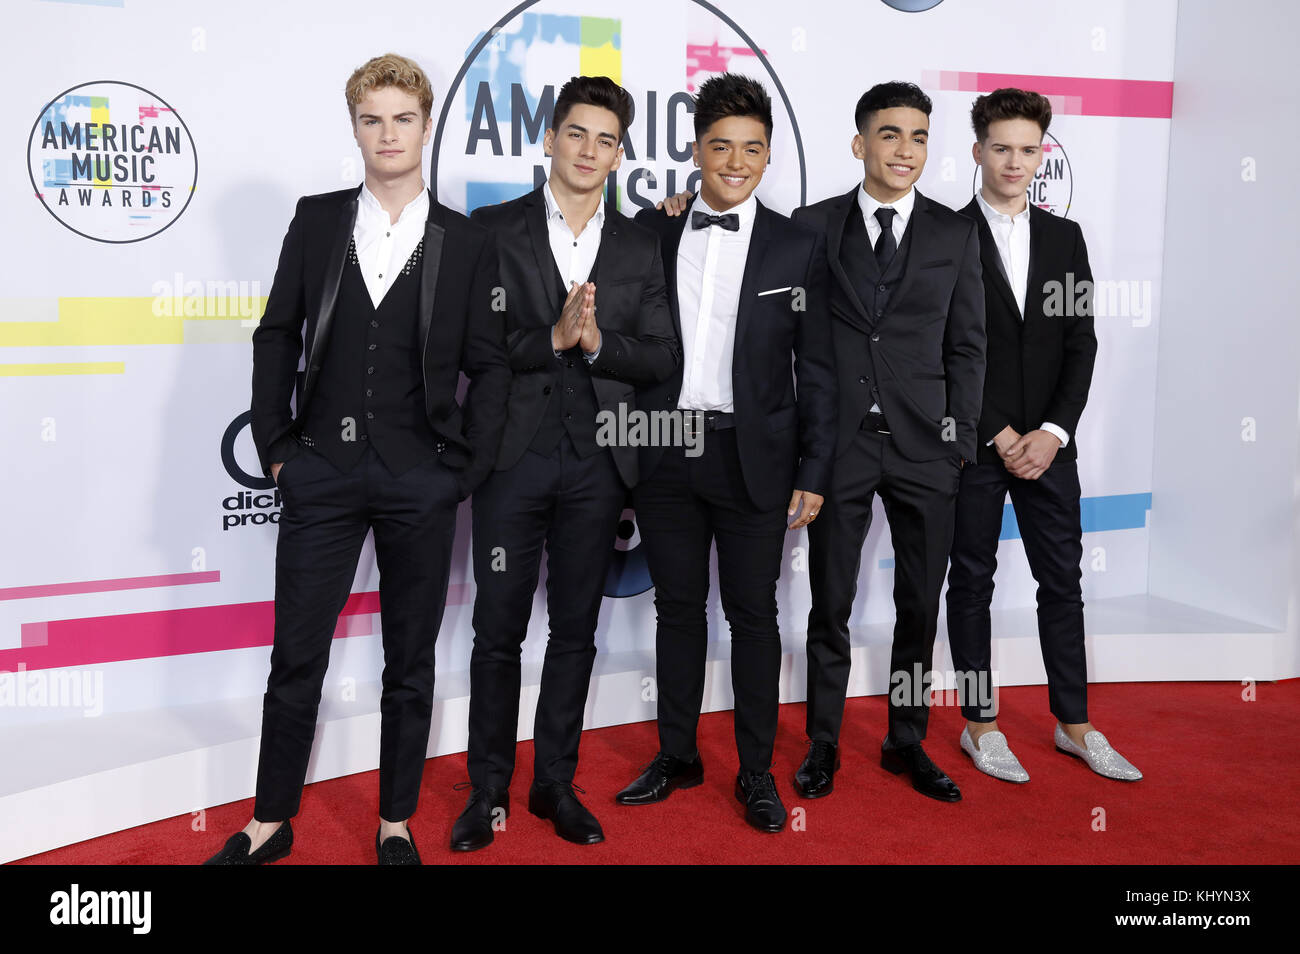 Brady Tutton, Chance Perez, Sergio Calderon Jr., Drew Ramos and Michael Conor (In Real Life) attend the 2017 American Music Awards at Microsoft Theater on November 19, 2017 in Los Angeles, California. | Verwendung weltweit Stock Photo